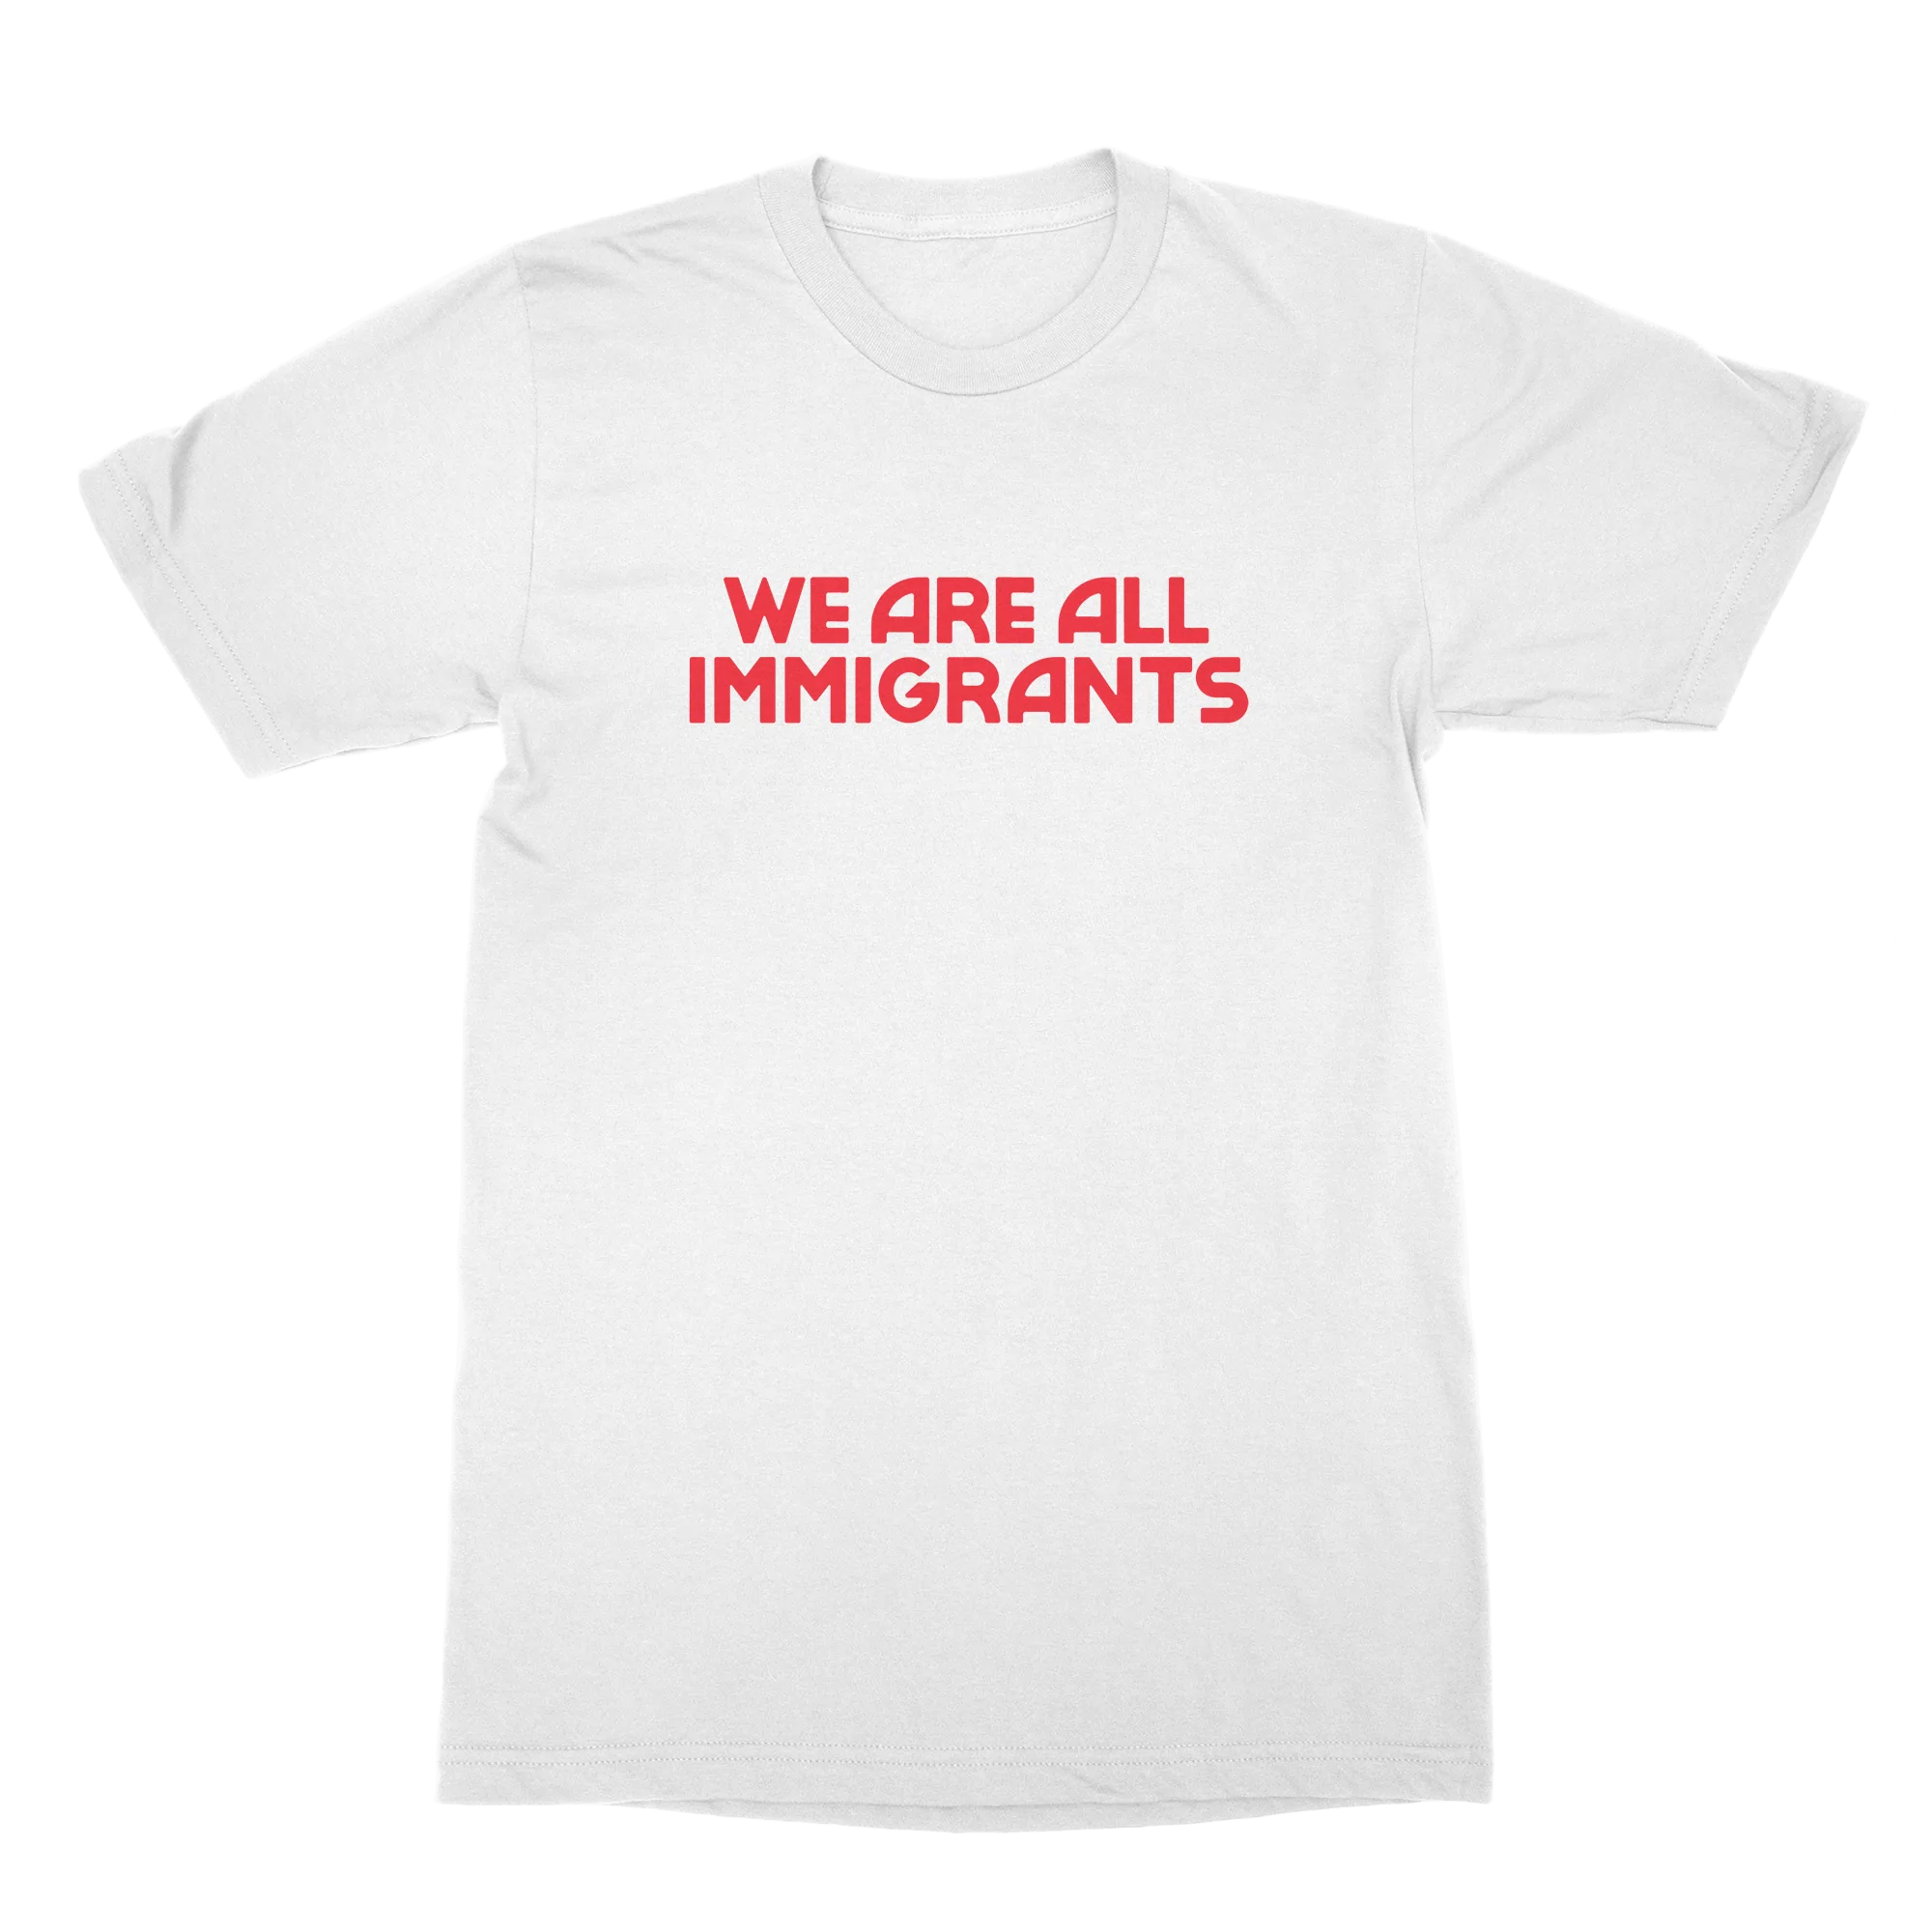 We Are All Immigrants T-Shirt (White)